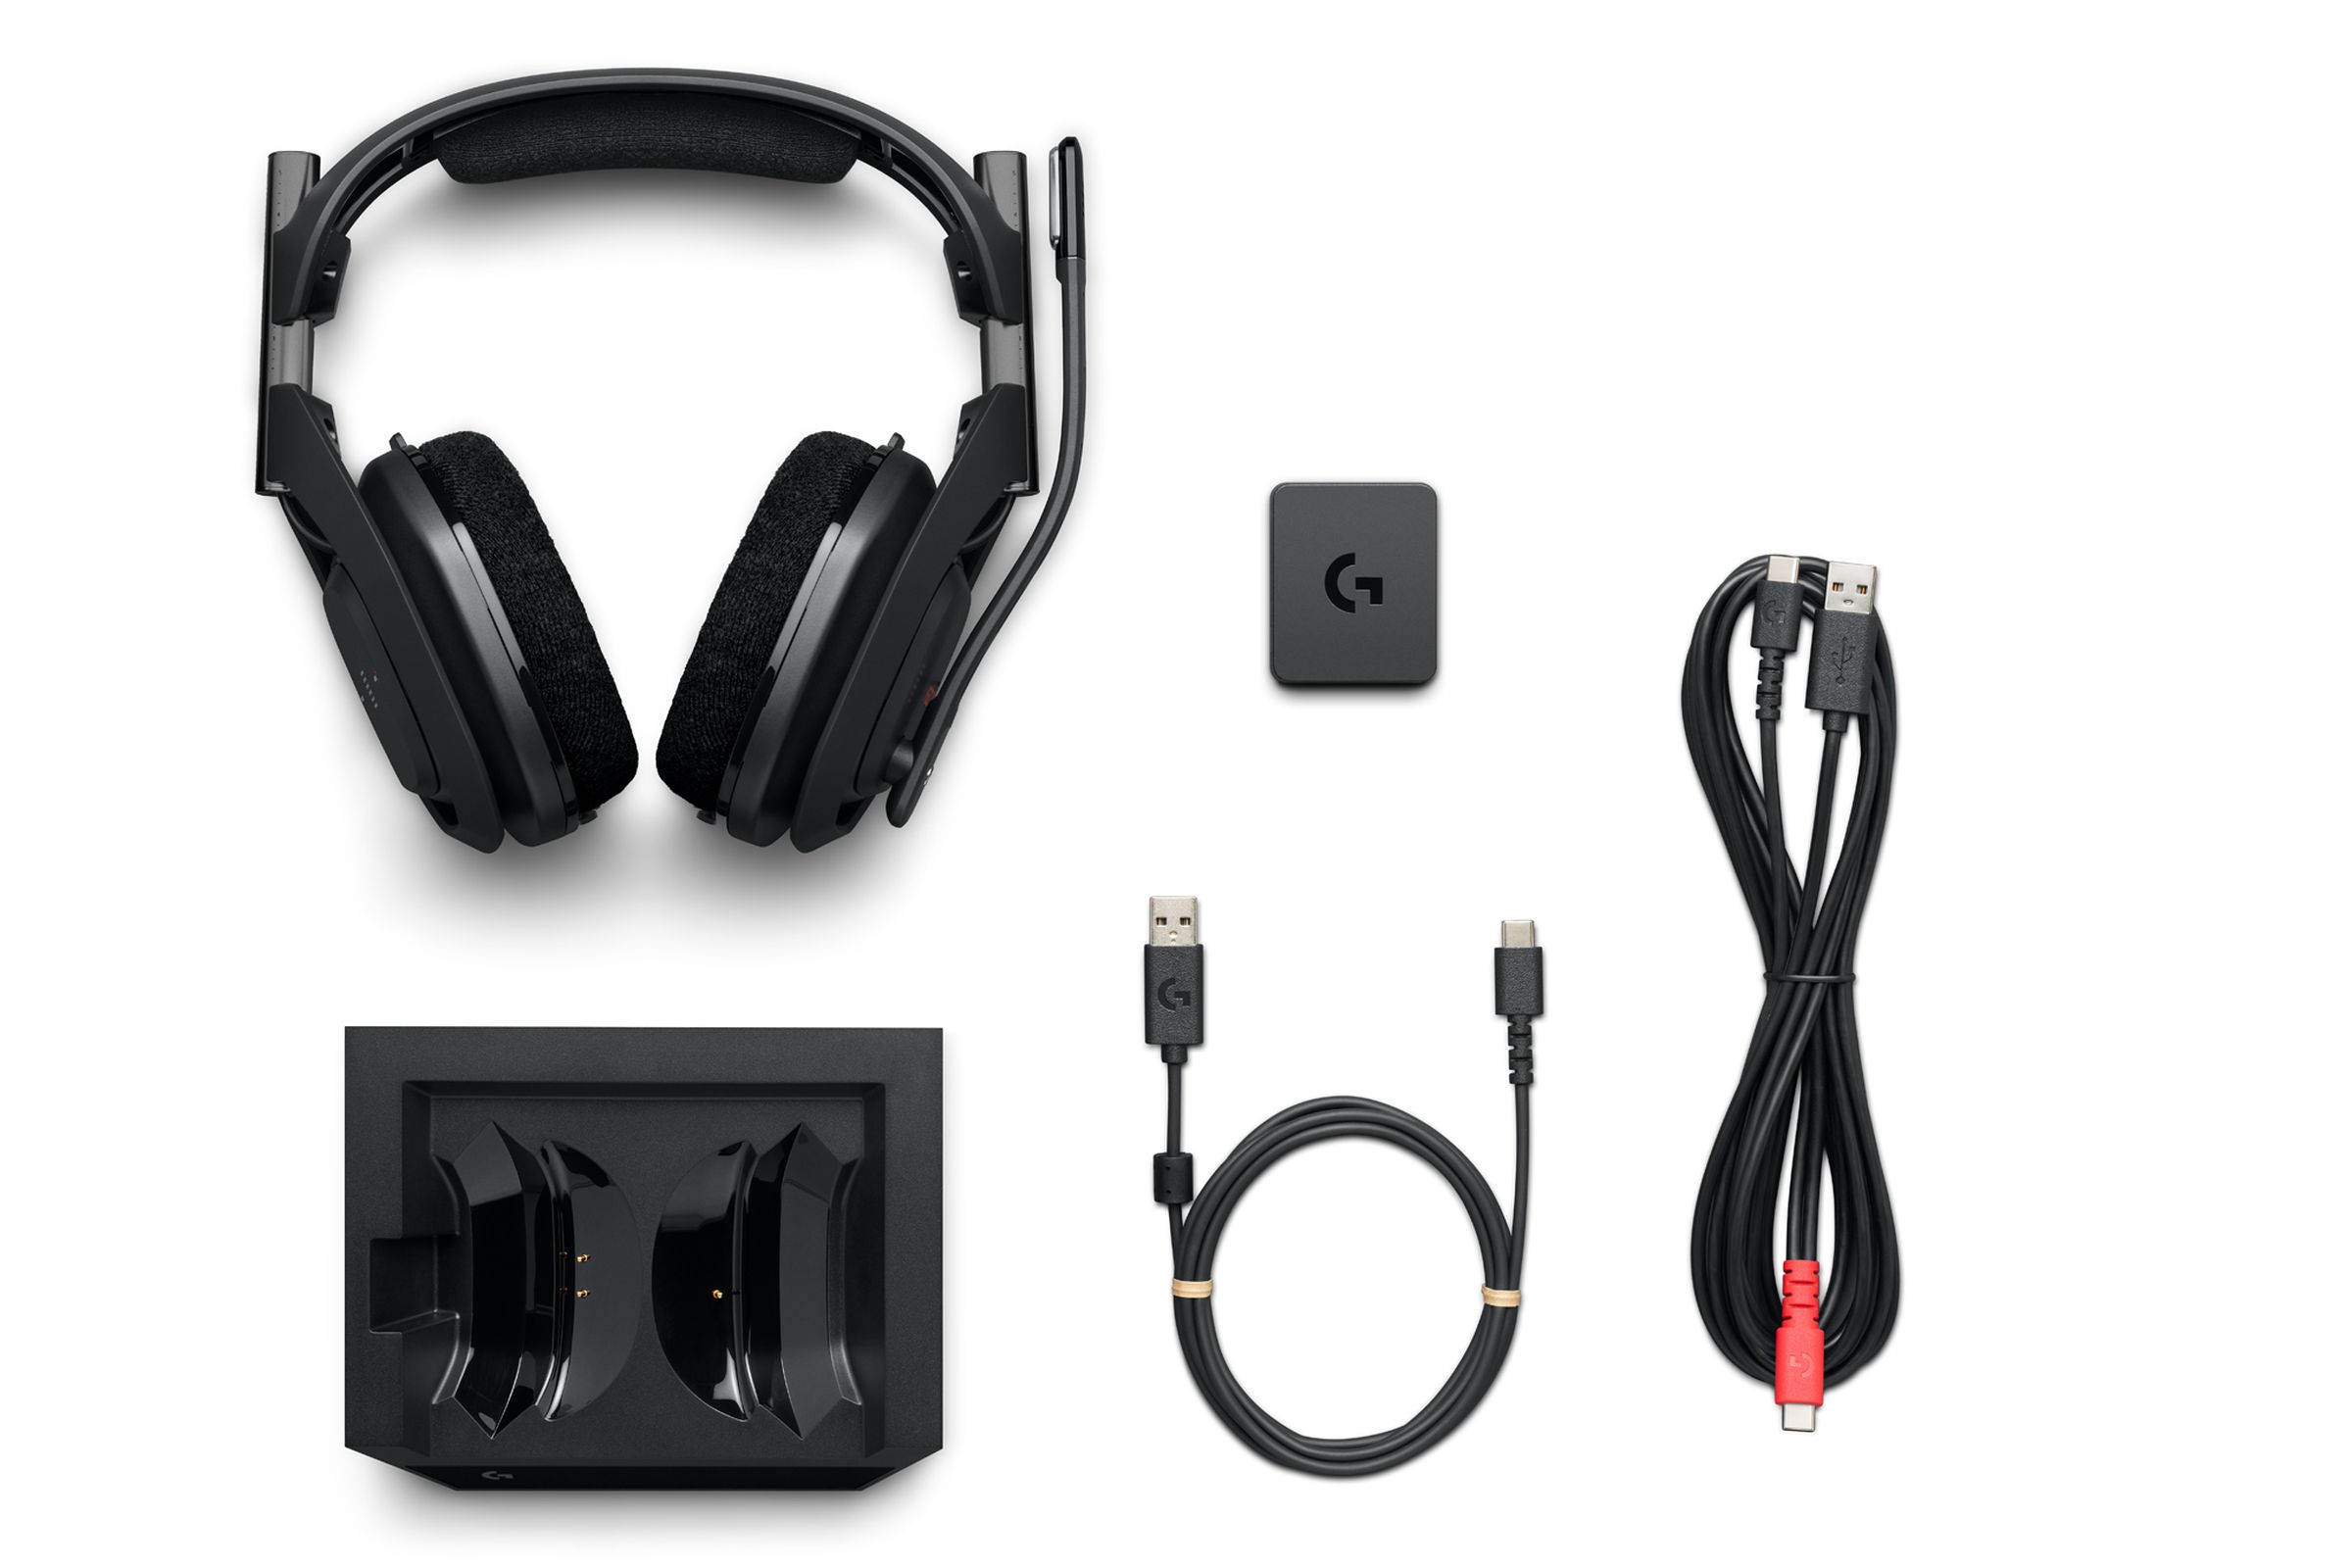 Each A50 X comes with its dock, receiver, and a double Y-style cable that connects to both a USB power source and your computer.